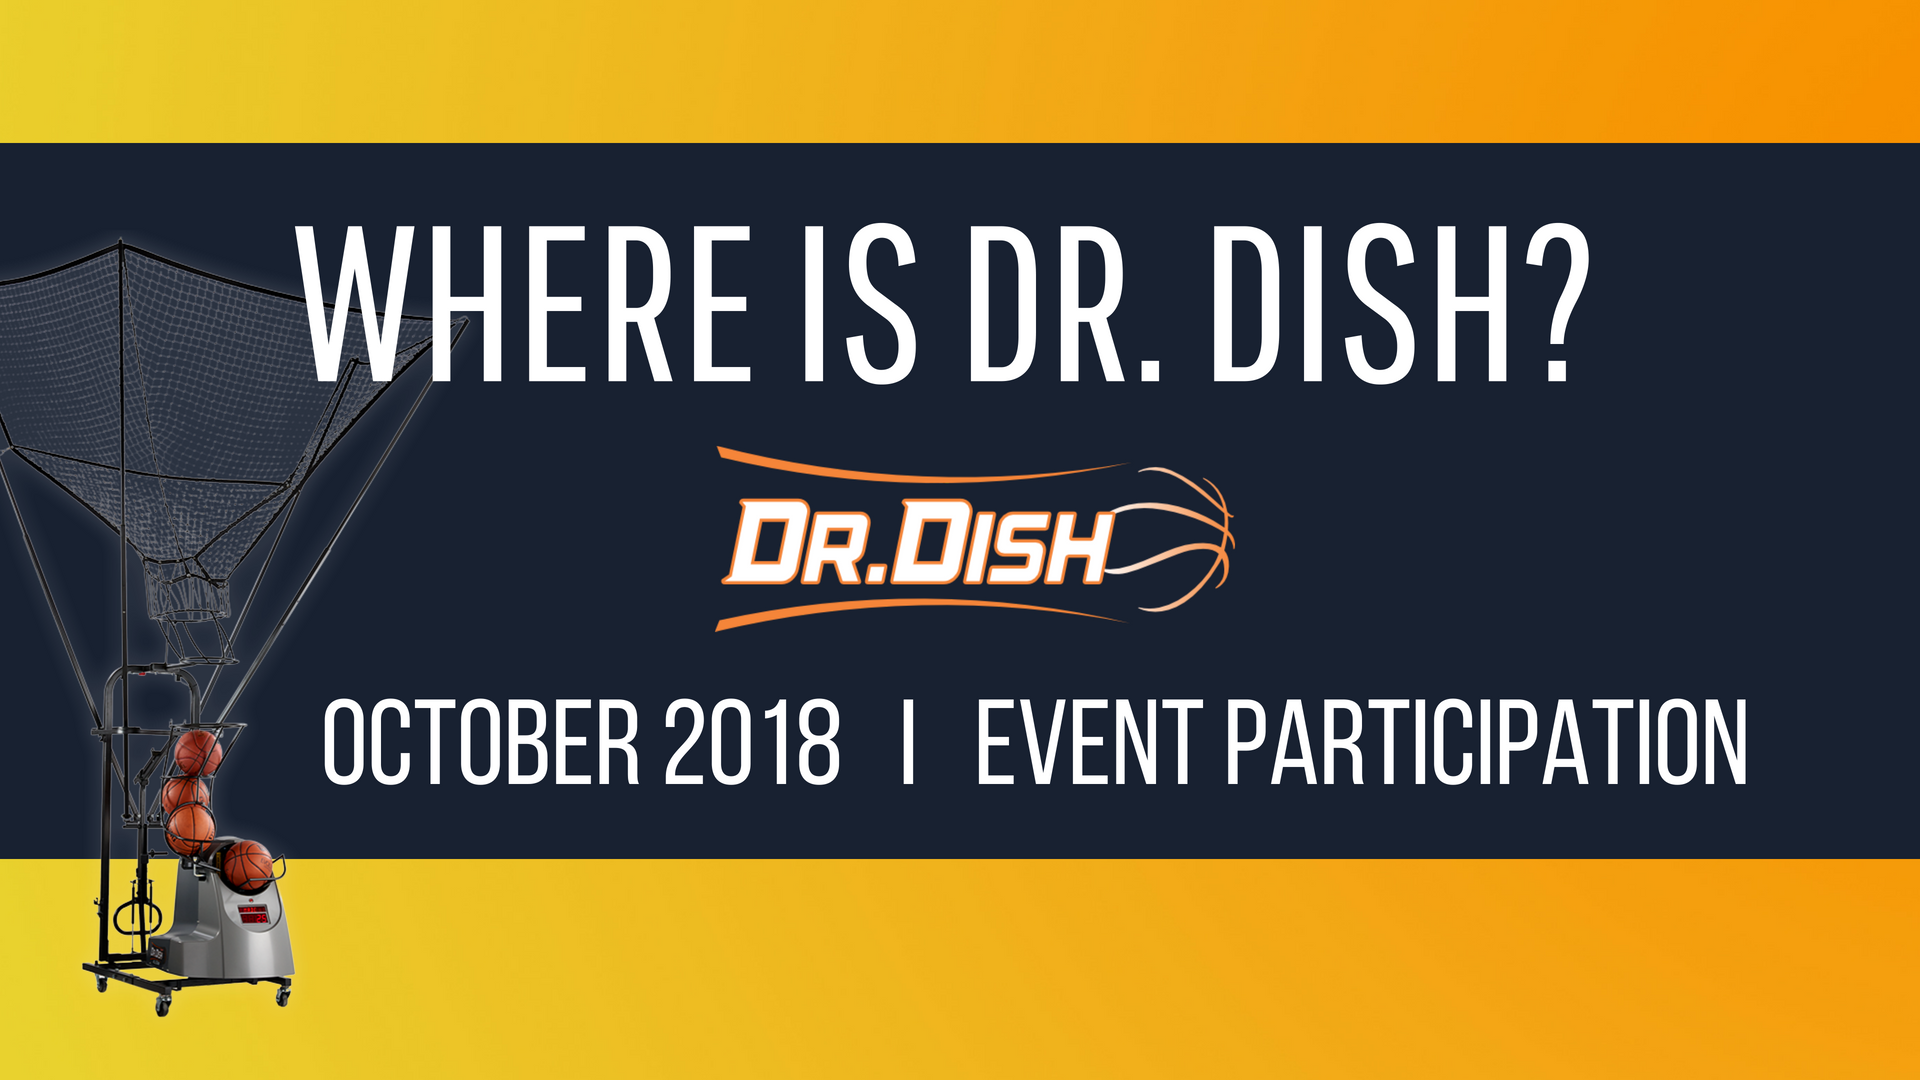 Where is Dr. dish_September 2018event participation (2)